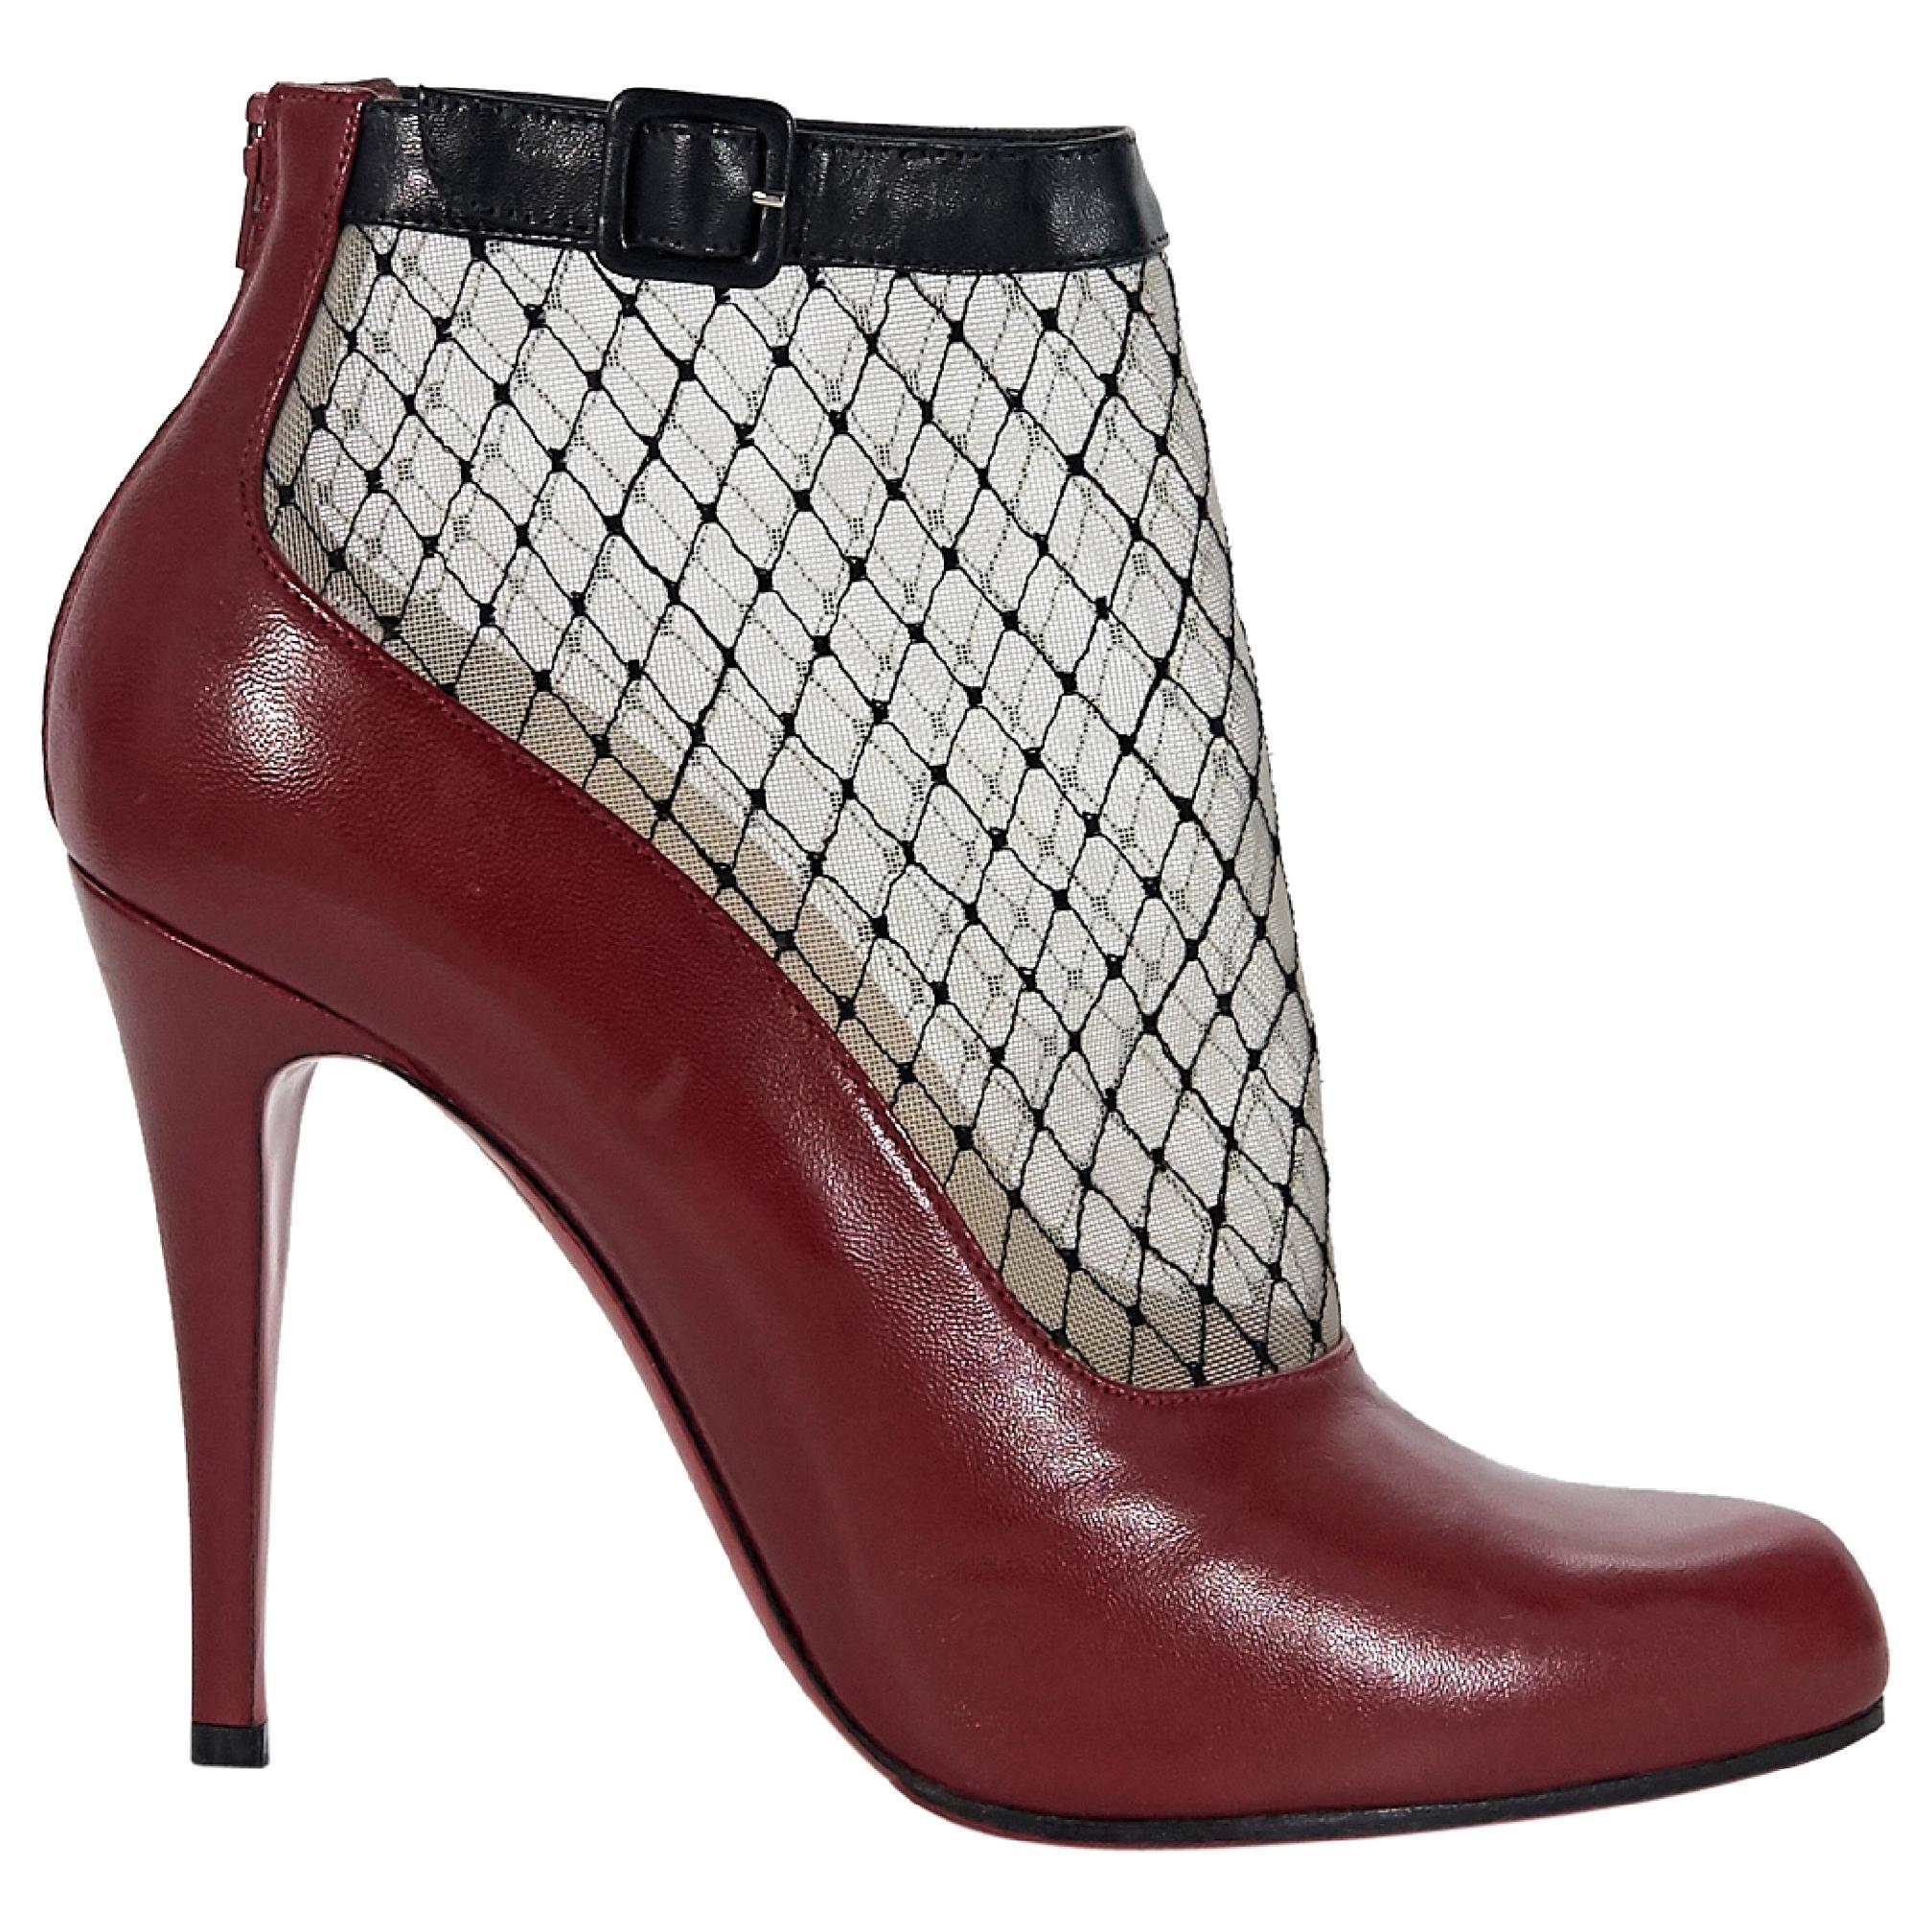 Red Christian Louboutin Leather Fishnet Ankle Boots